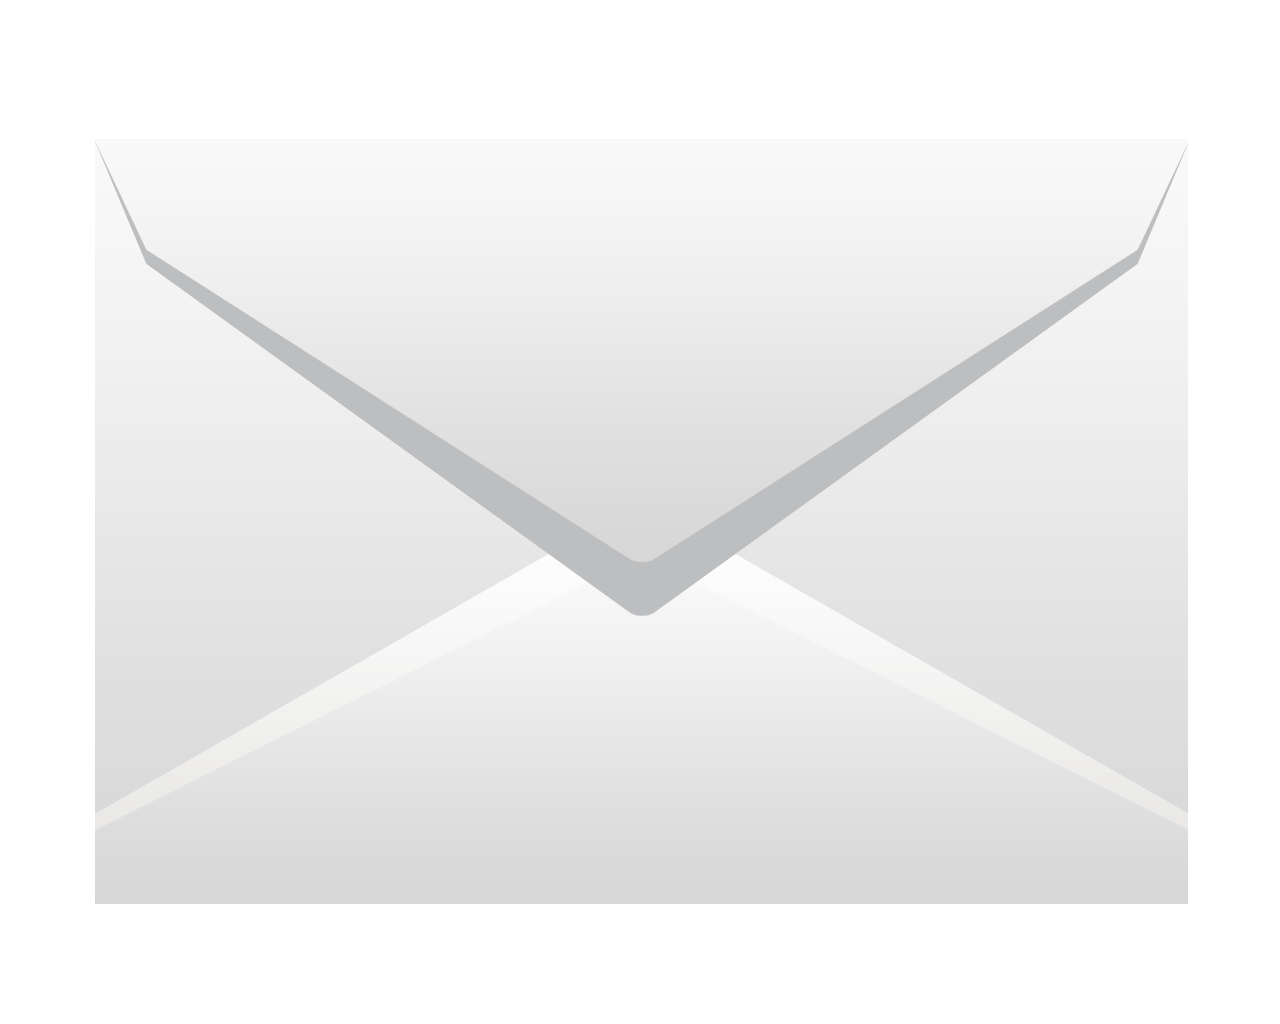 White Mail Logo - Free Mail Icon White Png 390613 | Download Mail Icon White Png - 390613